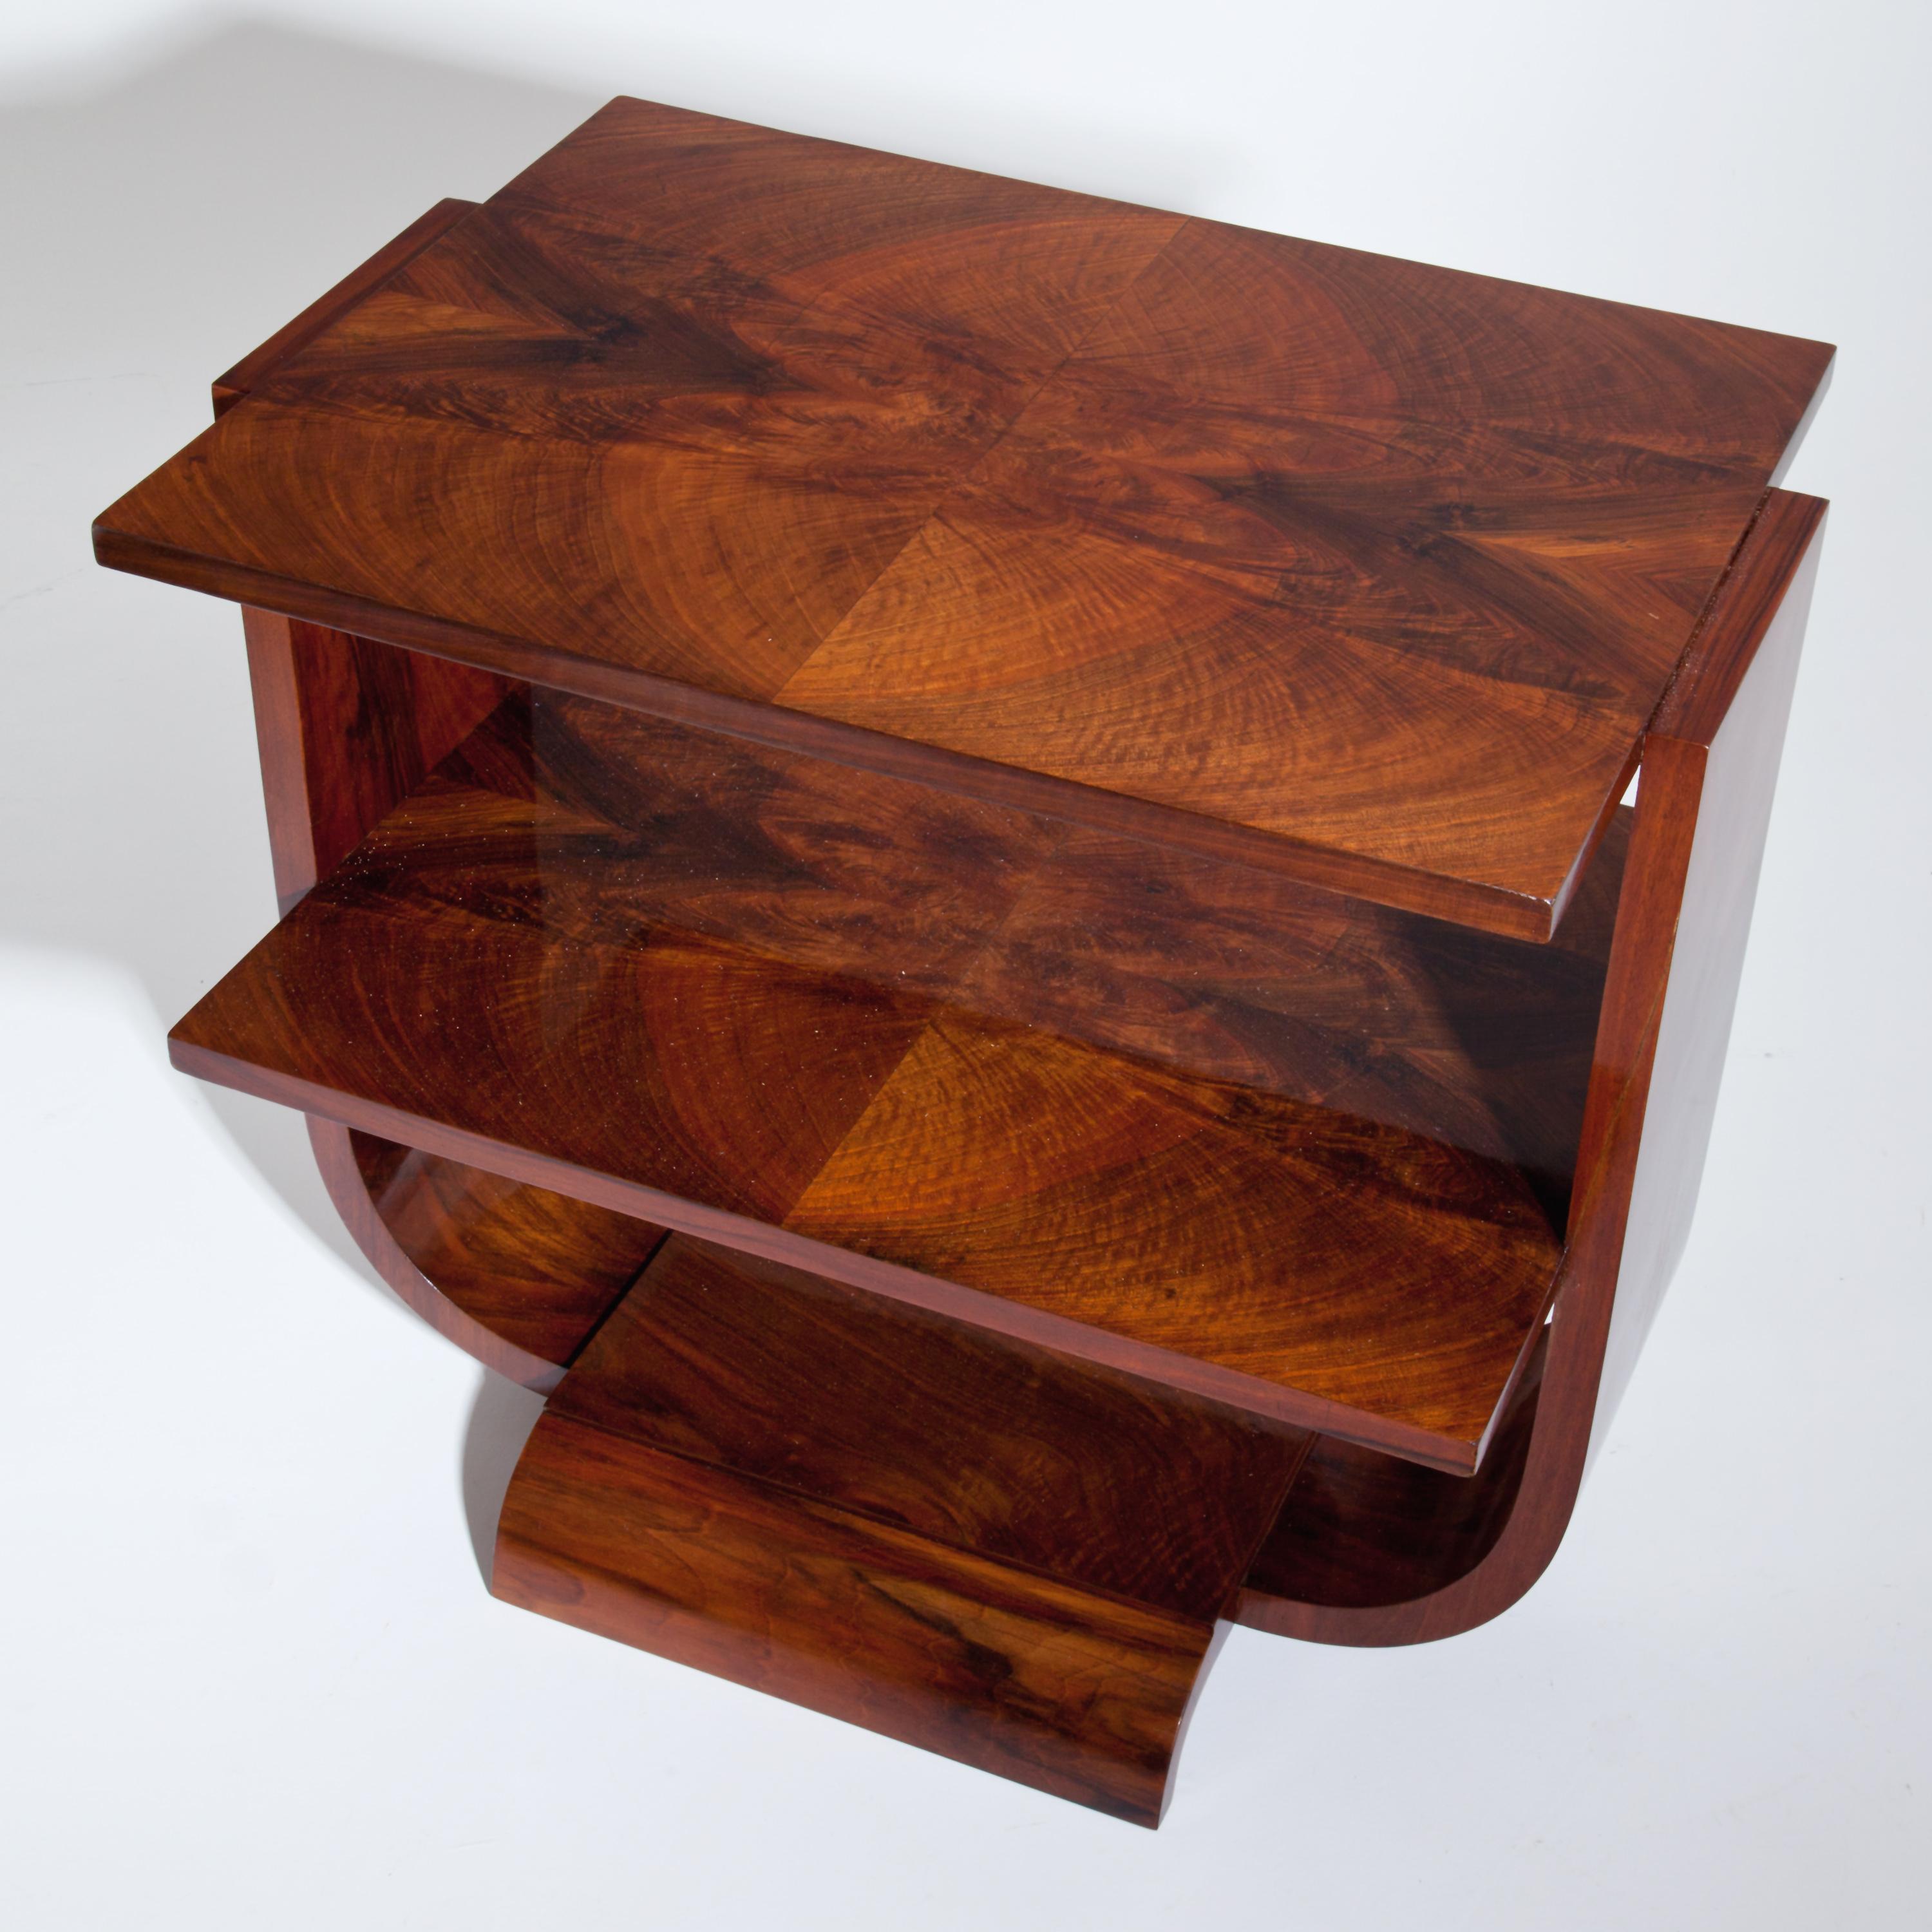 Art Deco two-tiered side table in mahogany.